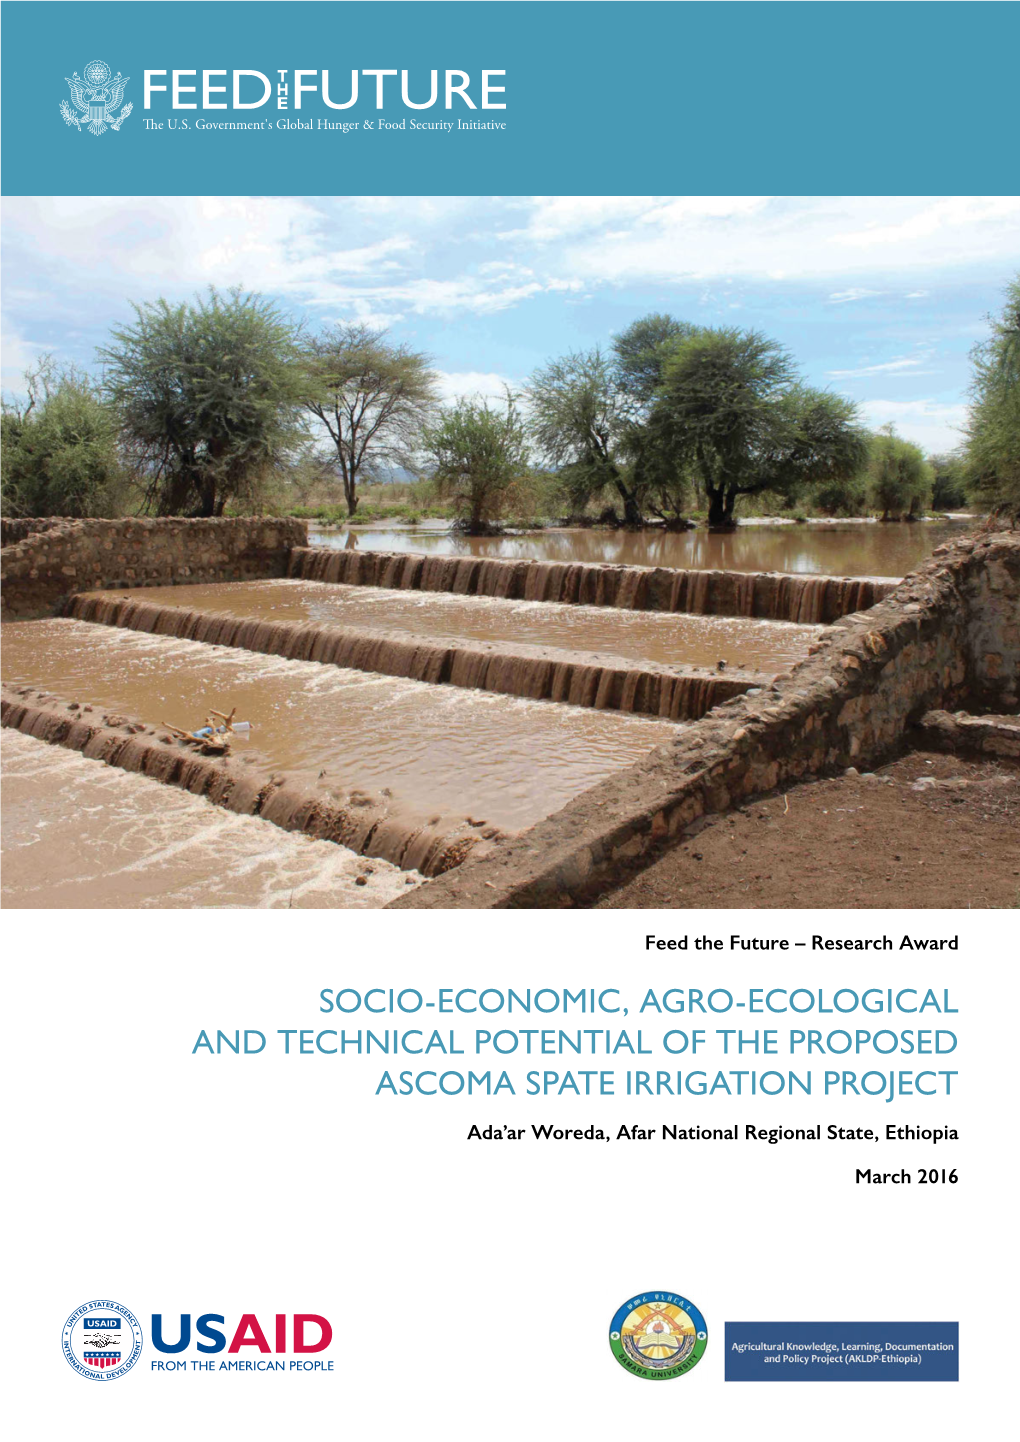 Socio-Economic, Agro-Ecological and Technical Potential of the Proposed Ascoma Spate Irrigation Project